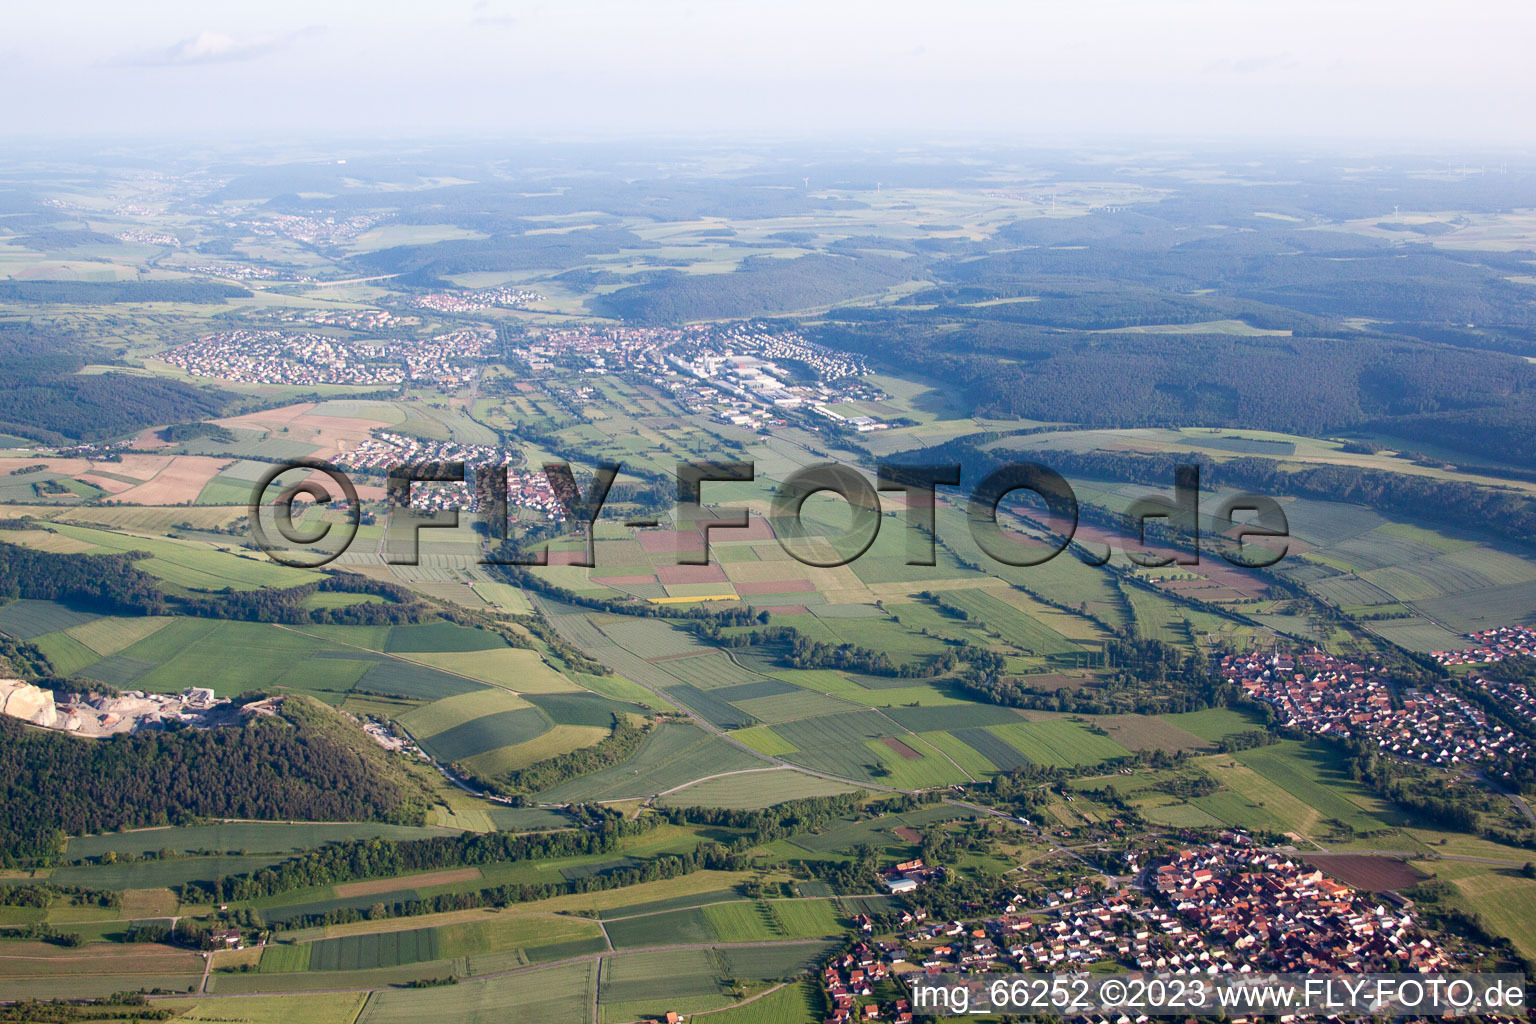 Tauberbischofsheim in the state Baden-Wuerttemberg, Germany from above